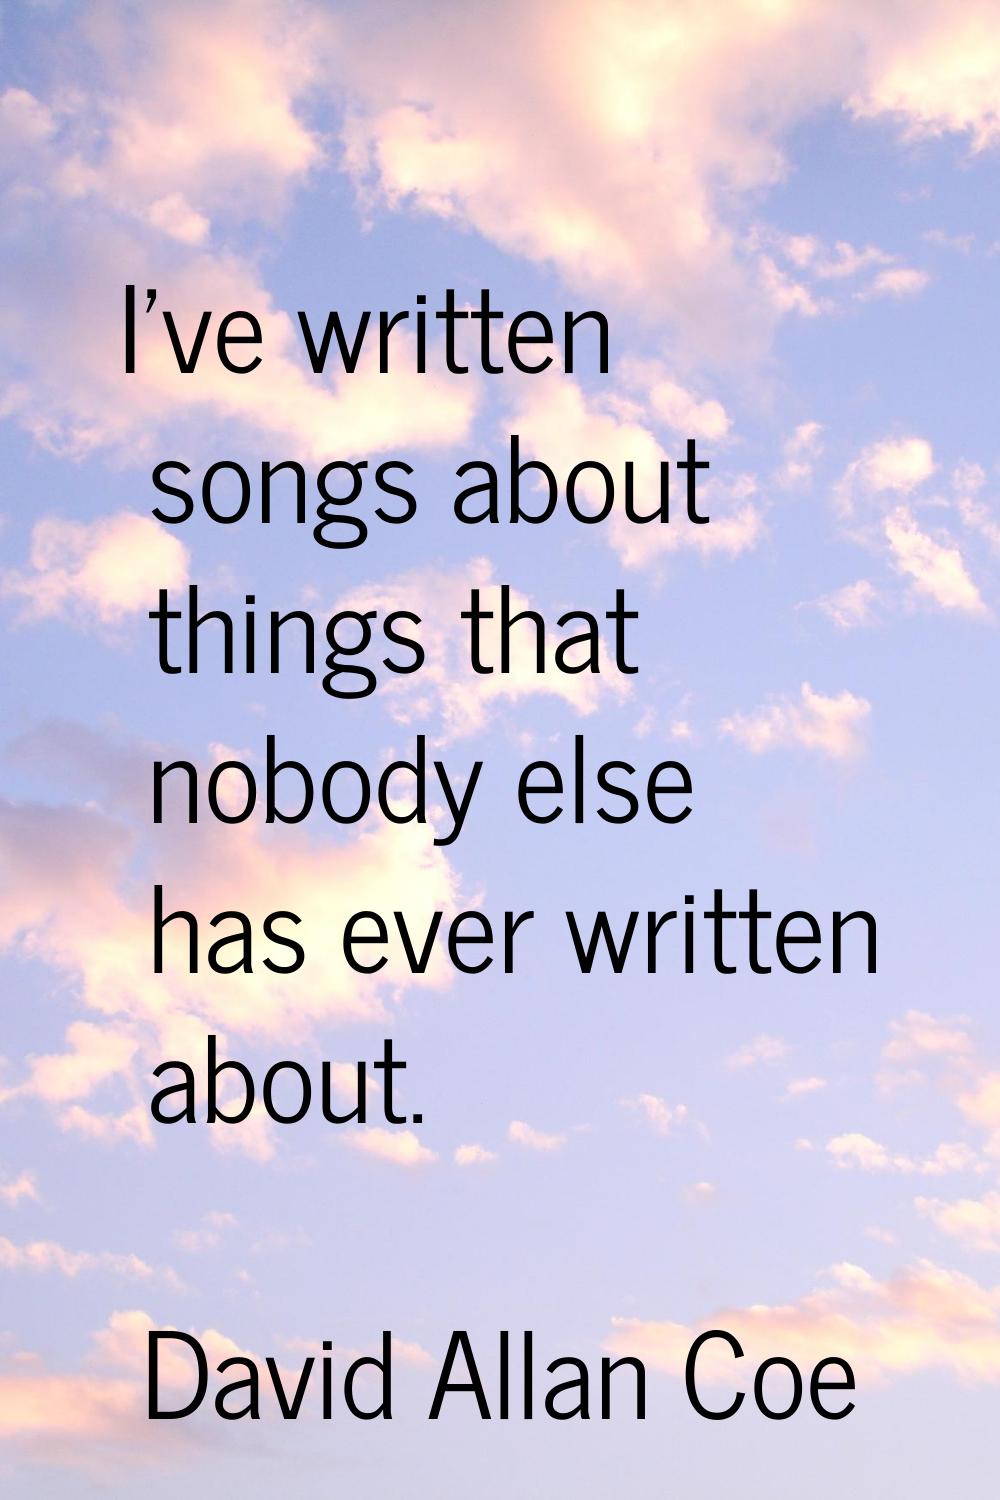 I've written songs about things that nobody else has ever written about.